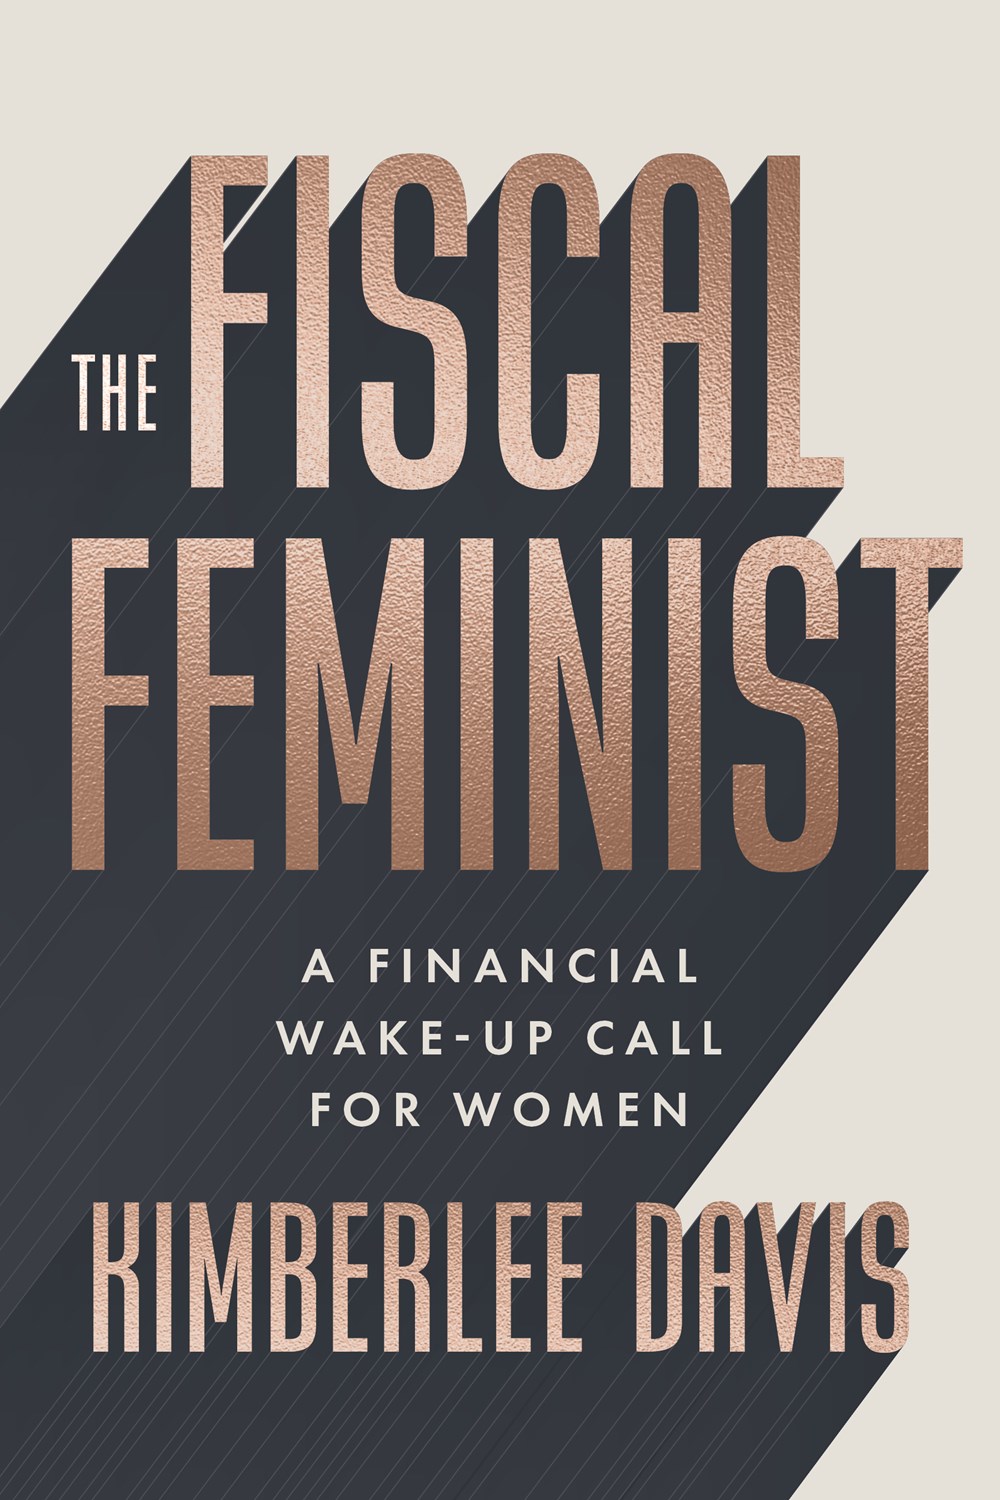 Fiscal Feminist A Financial Wake-Up Call for Women